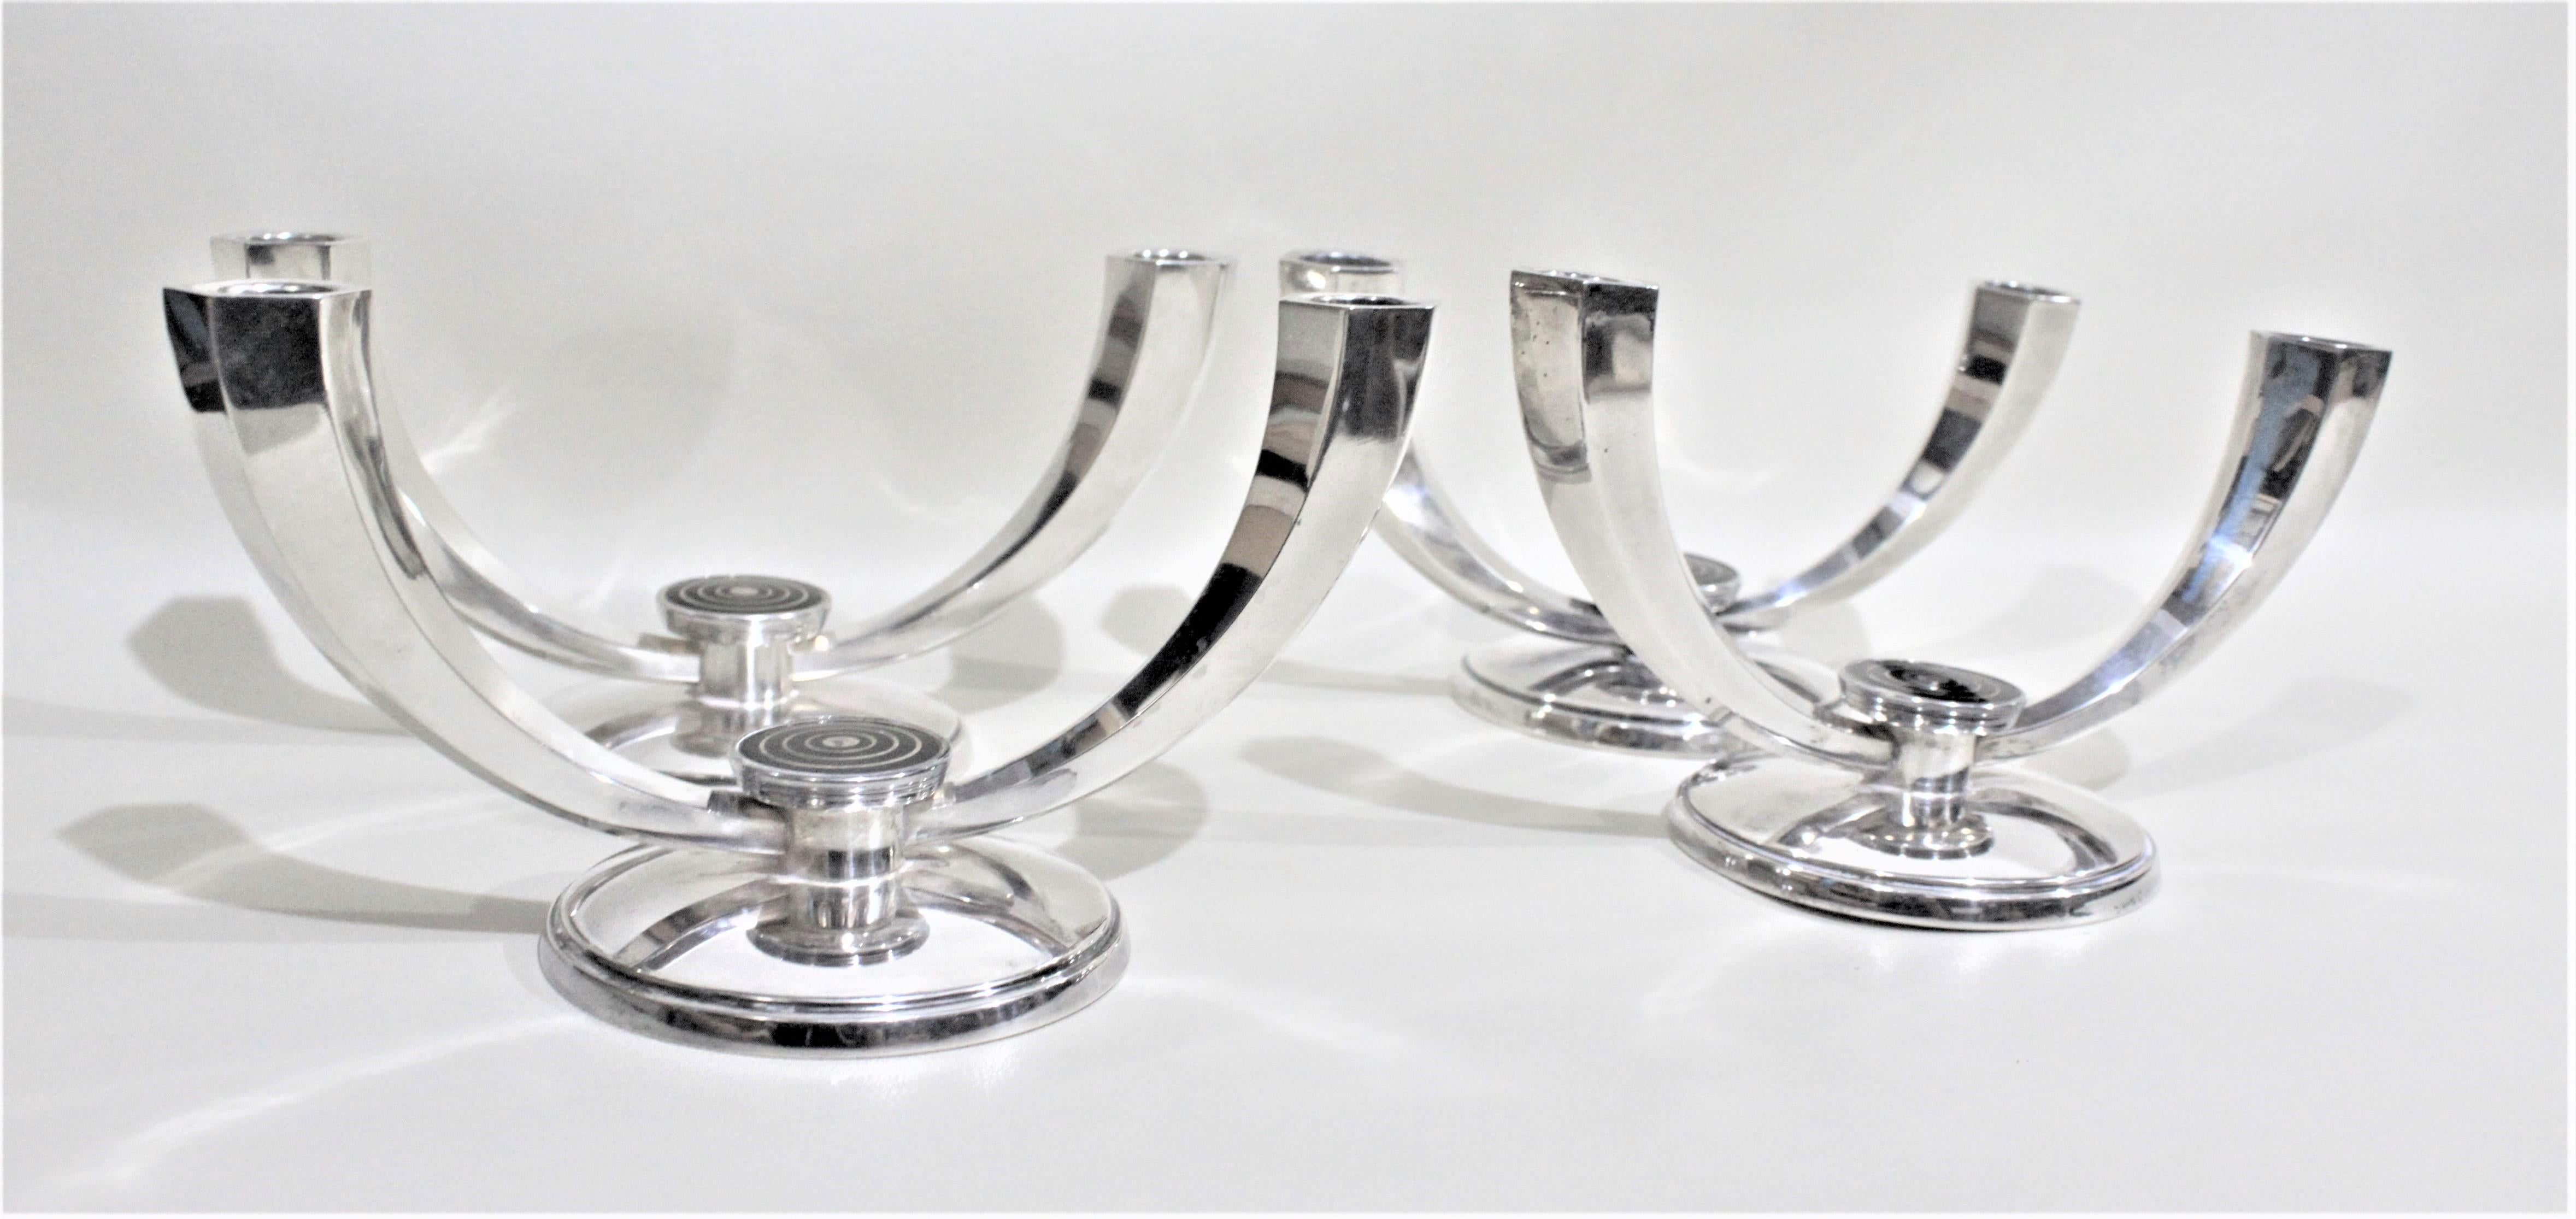 This set of four double branch sterling candlesticks were made in the period and style of Mid-Century Modern and are signed by J. Tostrup of Norway. Each candlestick has a black enameled 'bulls eye' style medallion between the two branches. The